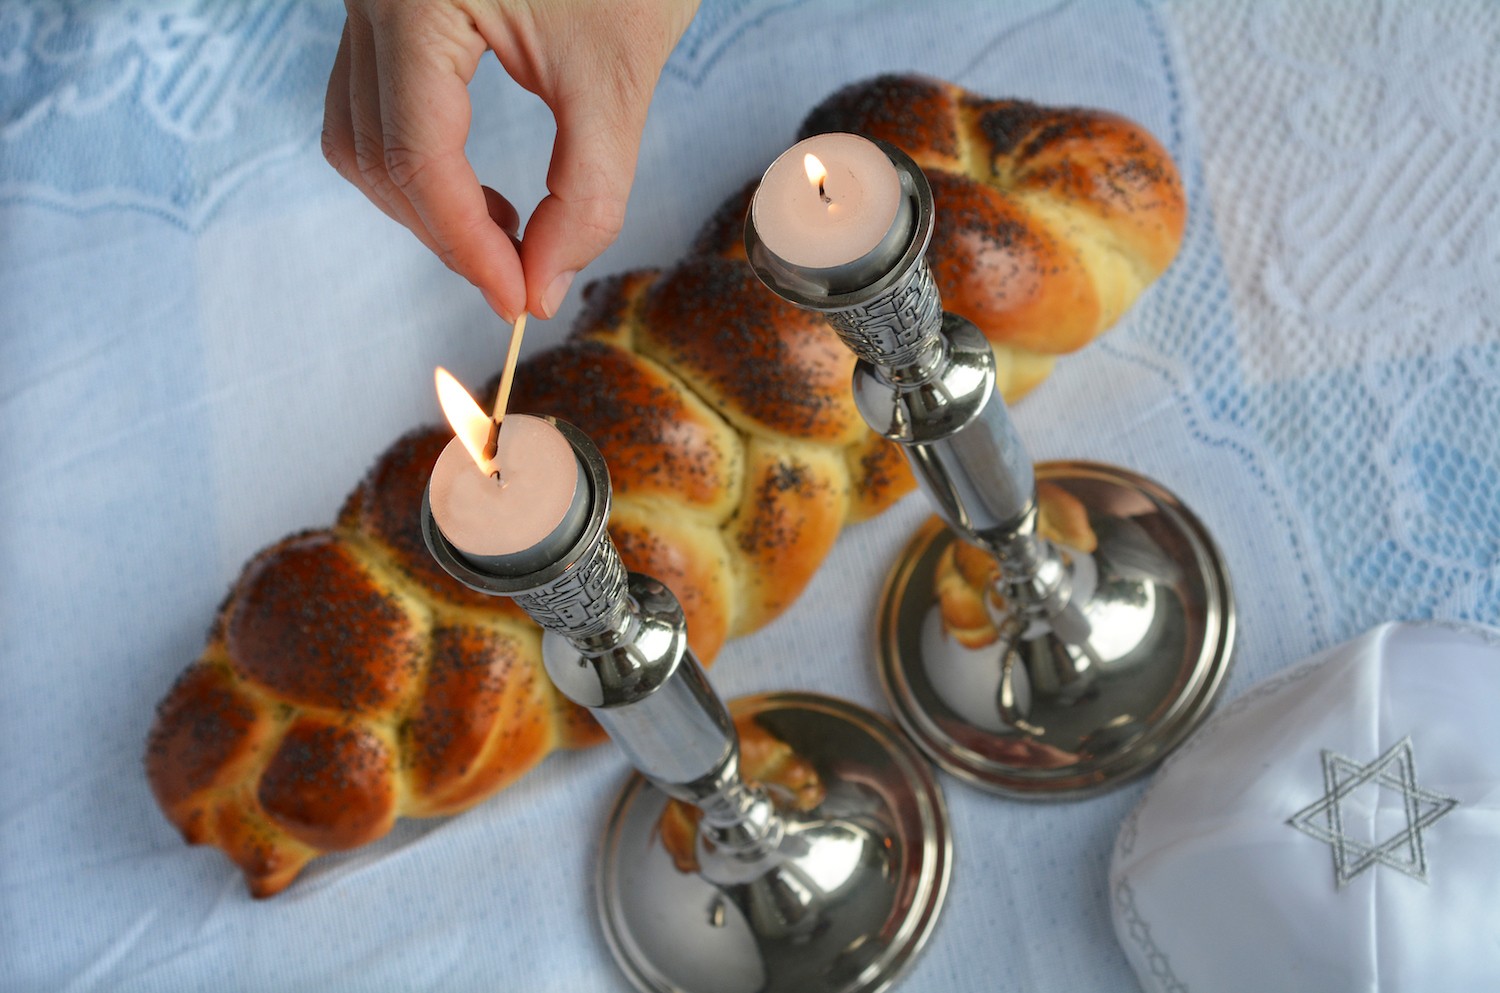 Shabbat eve table.Woman hand lit Shabbath candles with uncovered challah bread and kippah.